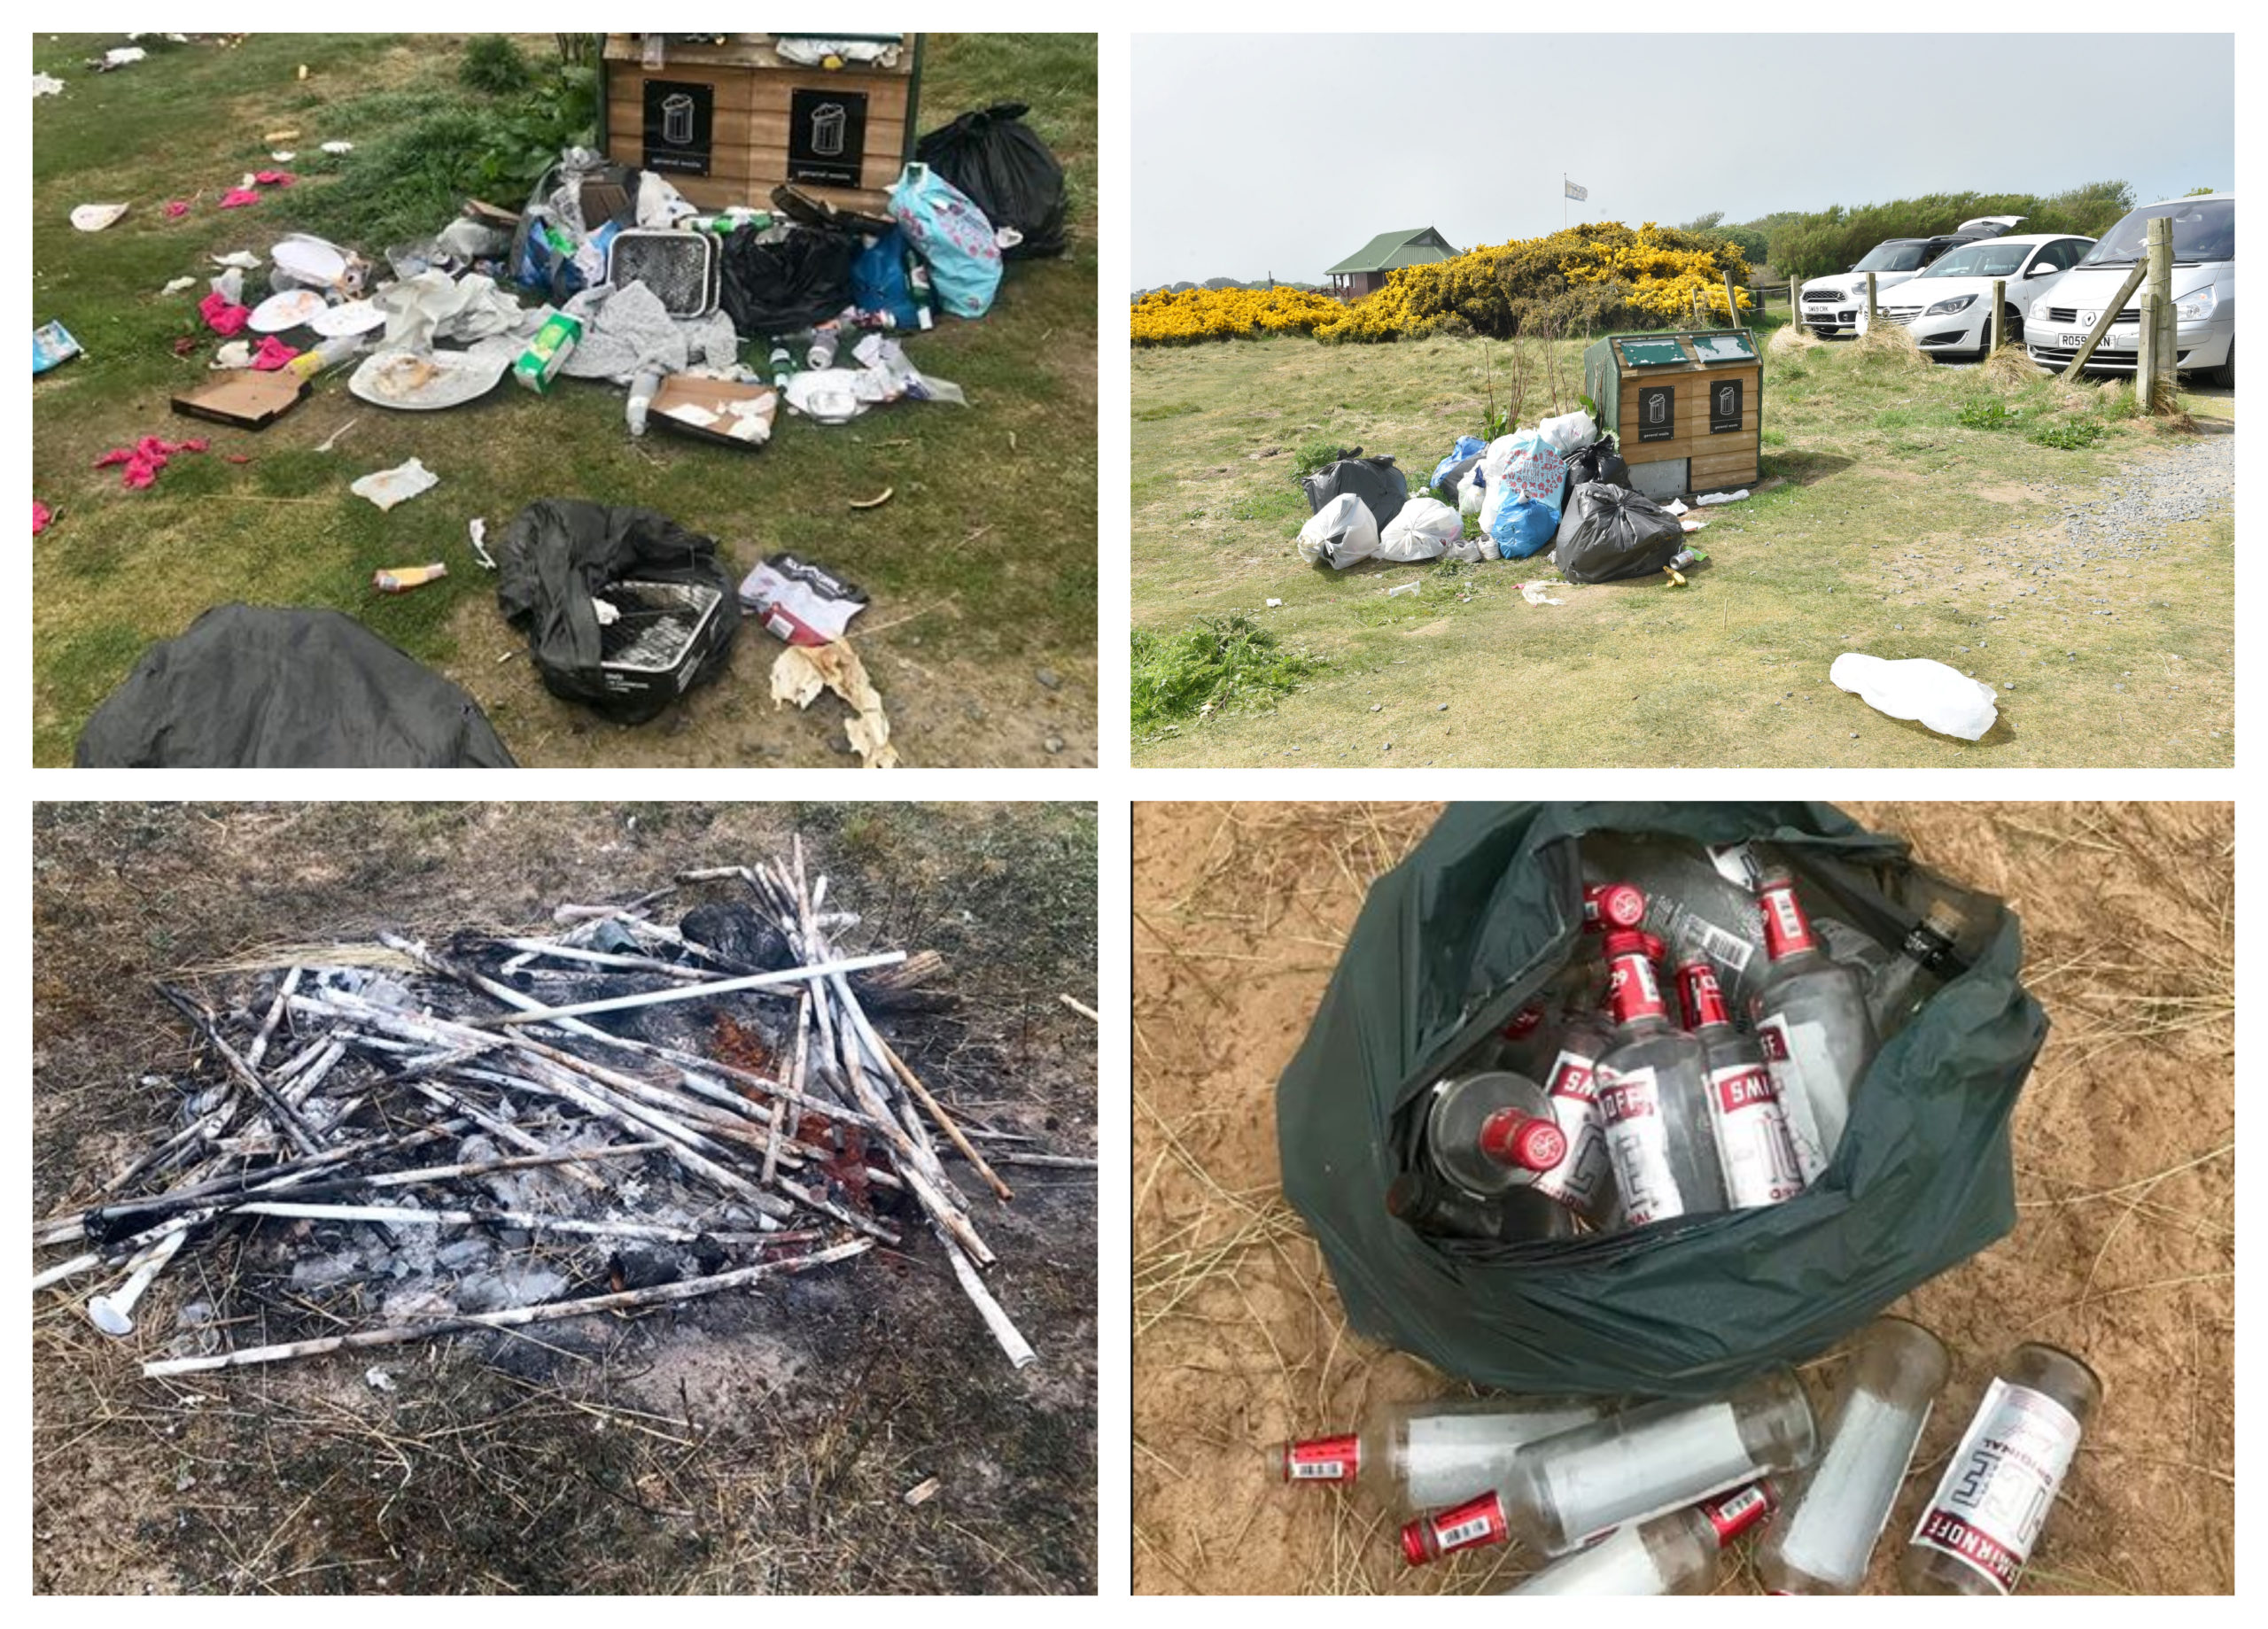 Some of the rubbish left at Balmedie